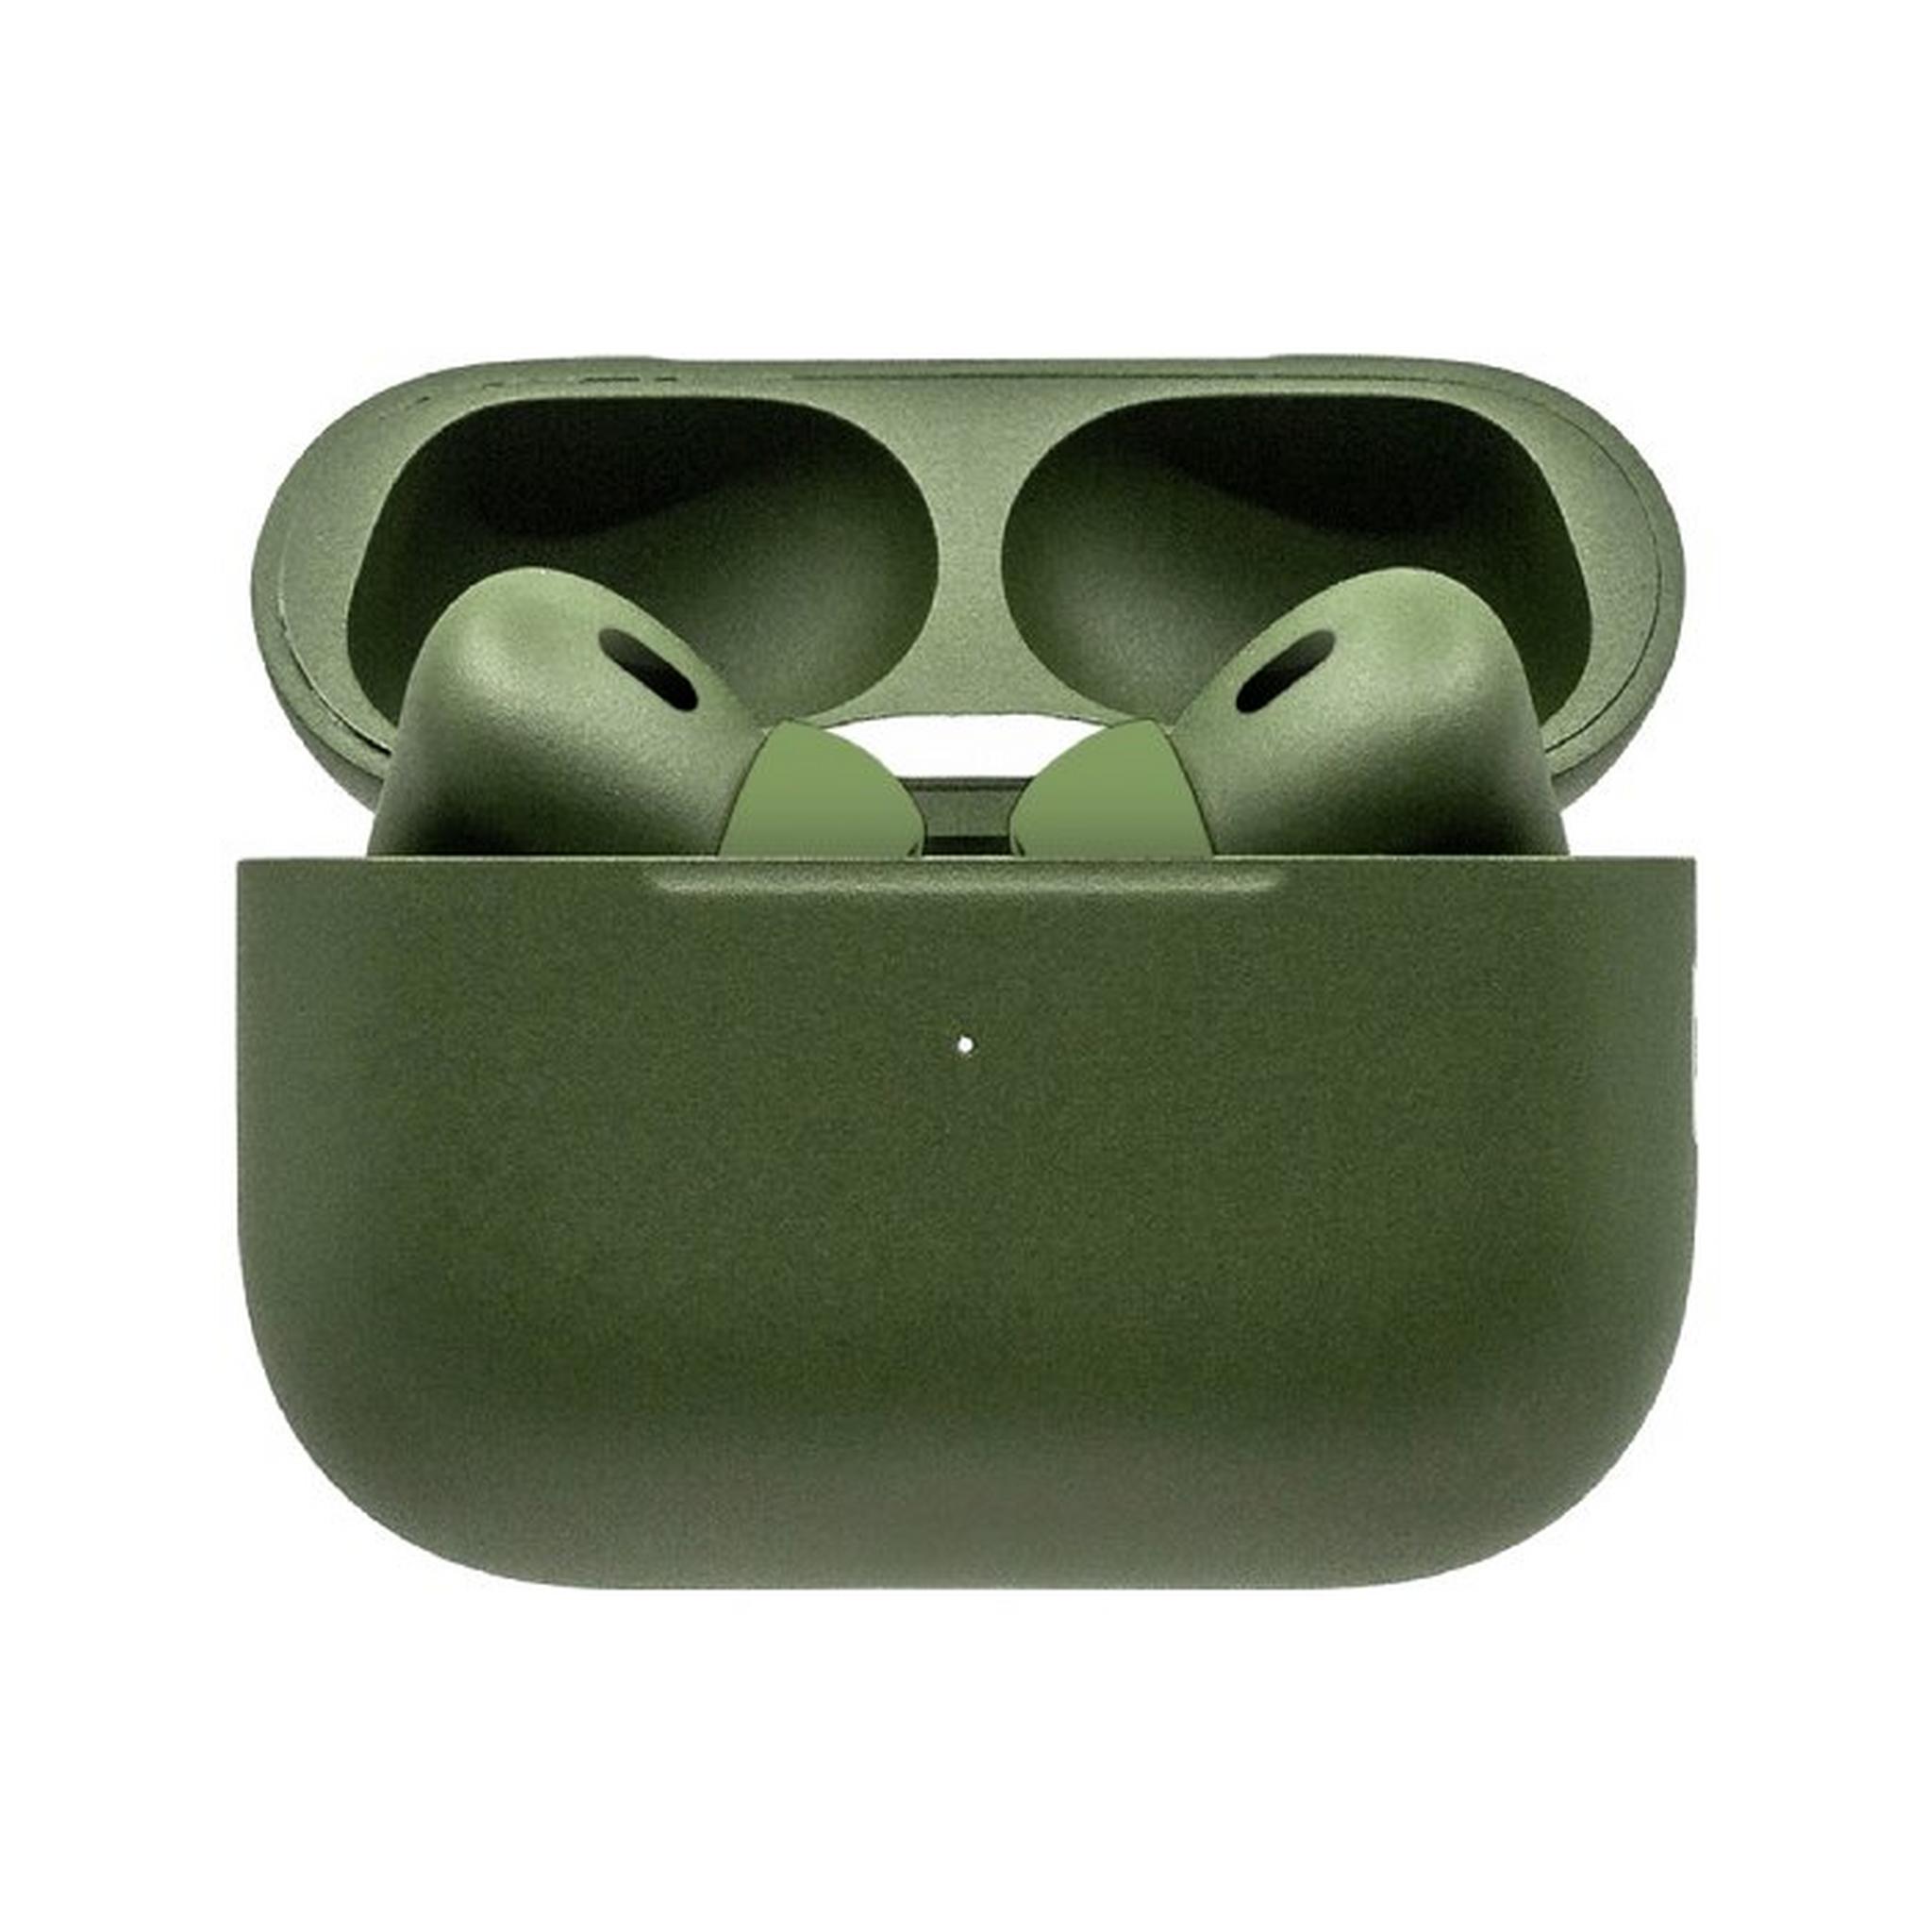 SWITCH Apple AirPods Pro Gen 2 Exclusive Army Green, ROG2UCEXCPNTARGRGB – Green Matte